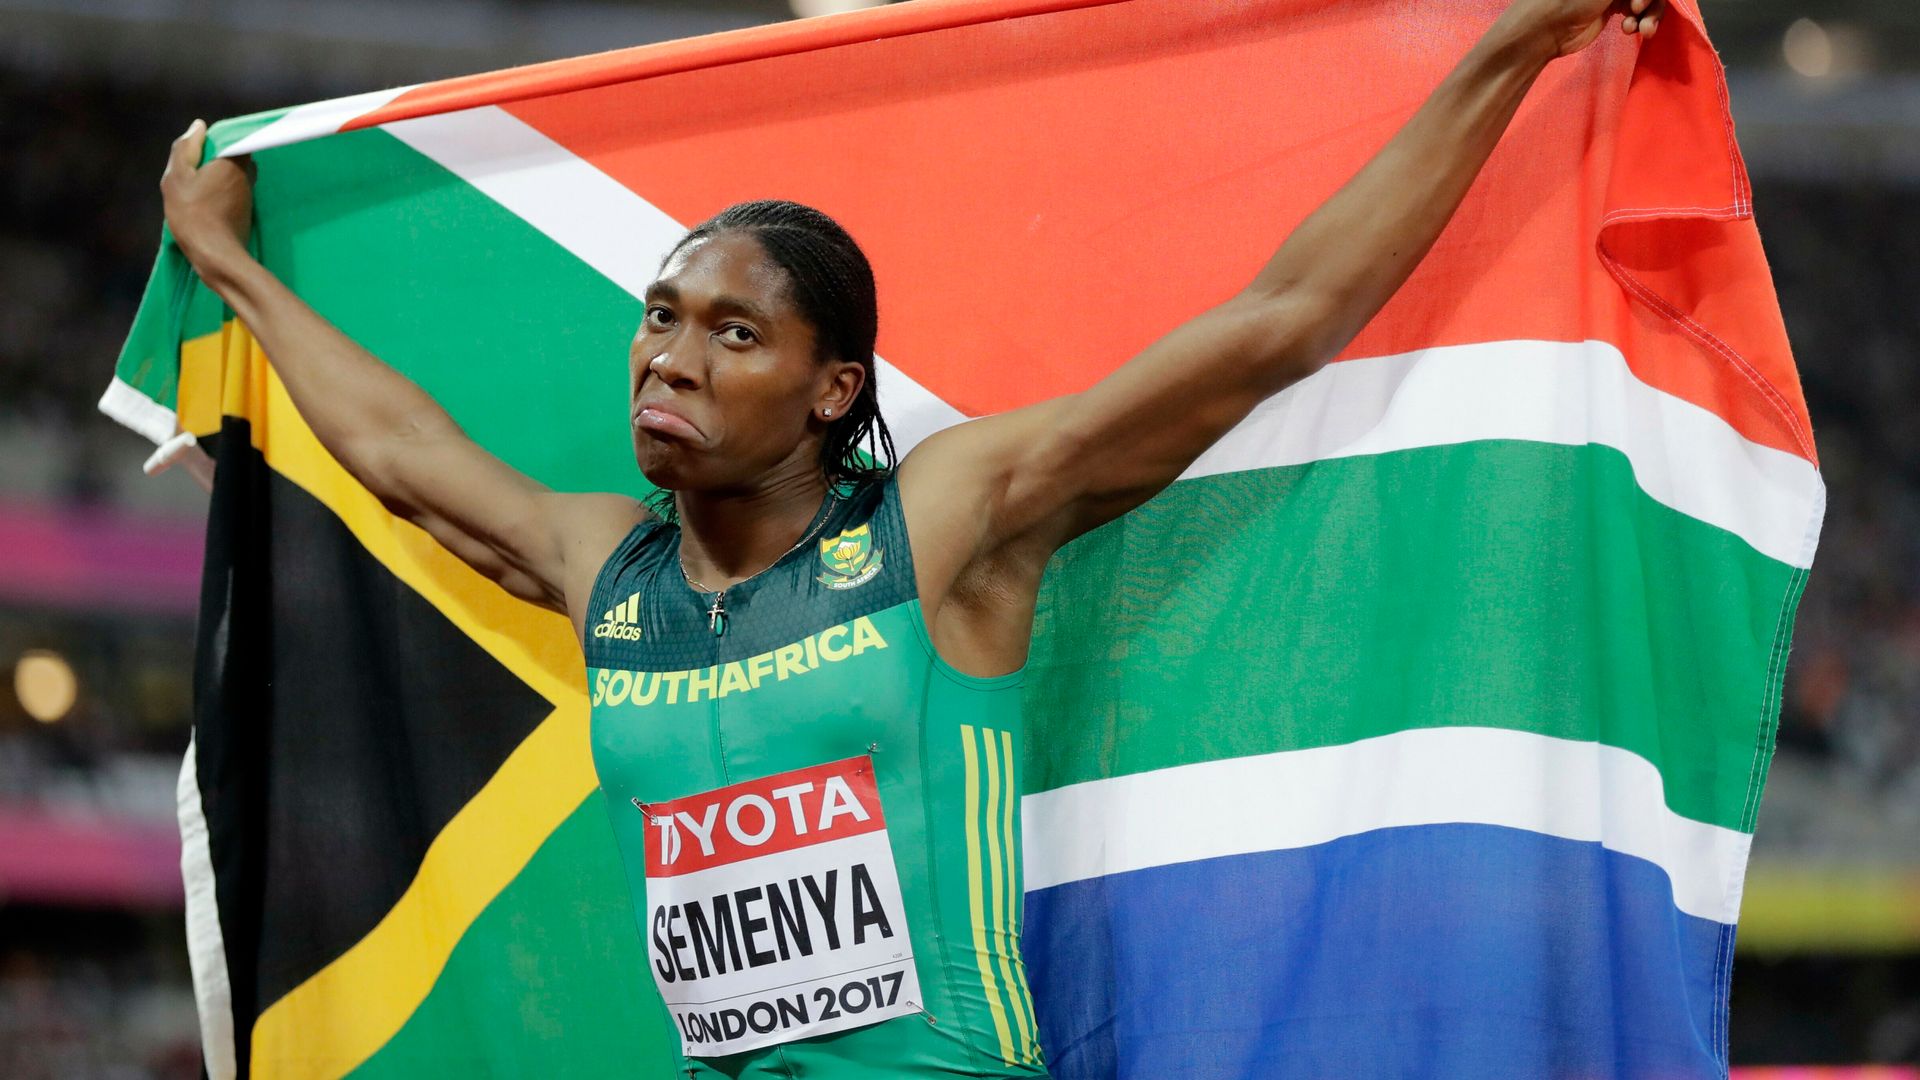 Semenya: I'm not ashamed to be different and will continue to fight